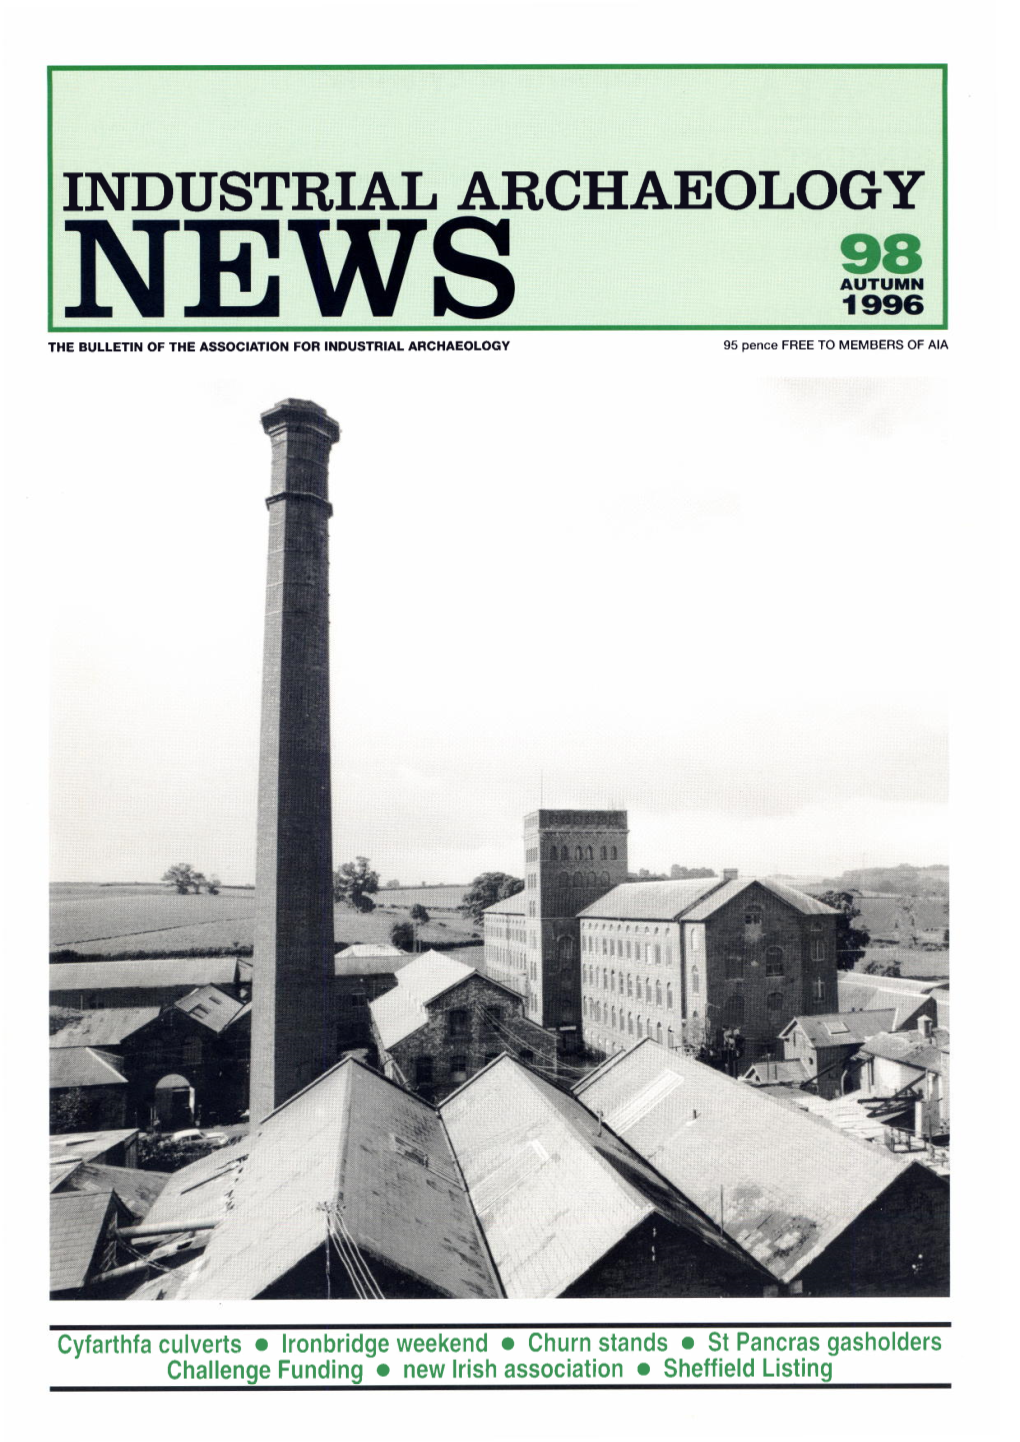 THE ASSOCIATION for INDUSTRIAL ARCHAEOLOGY 95 Oence FREE to MEMBERS of AIA